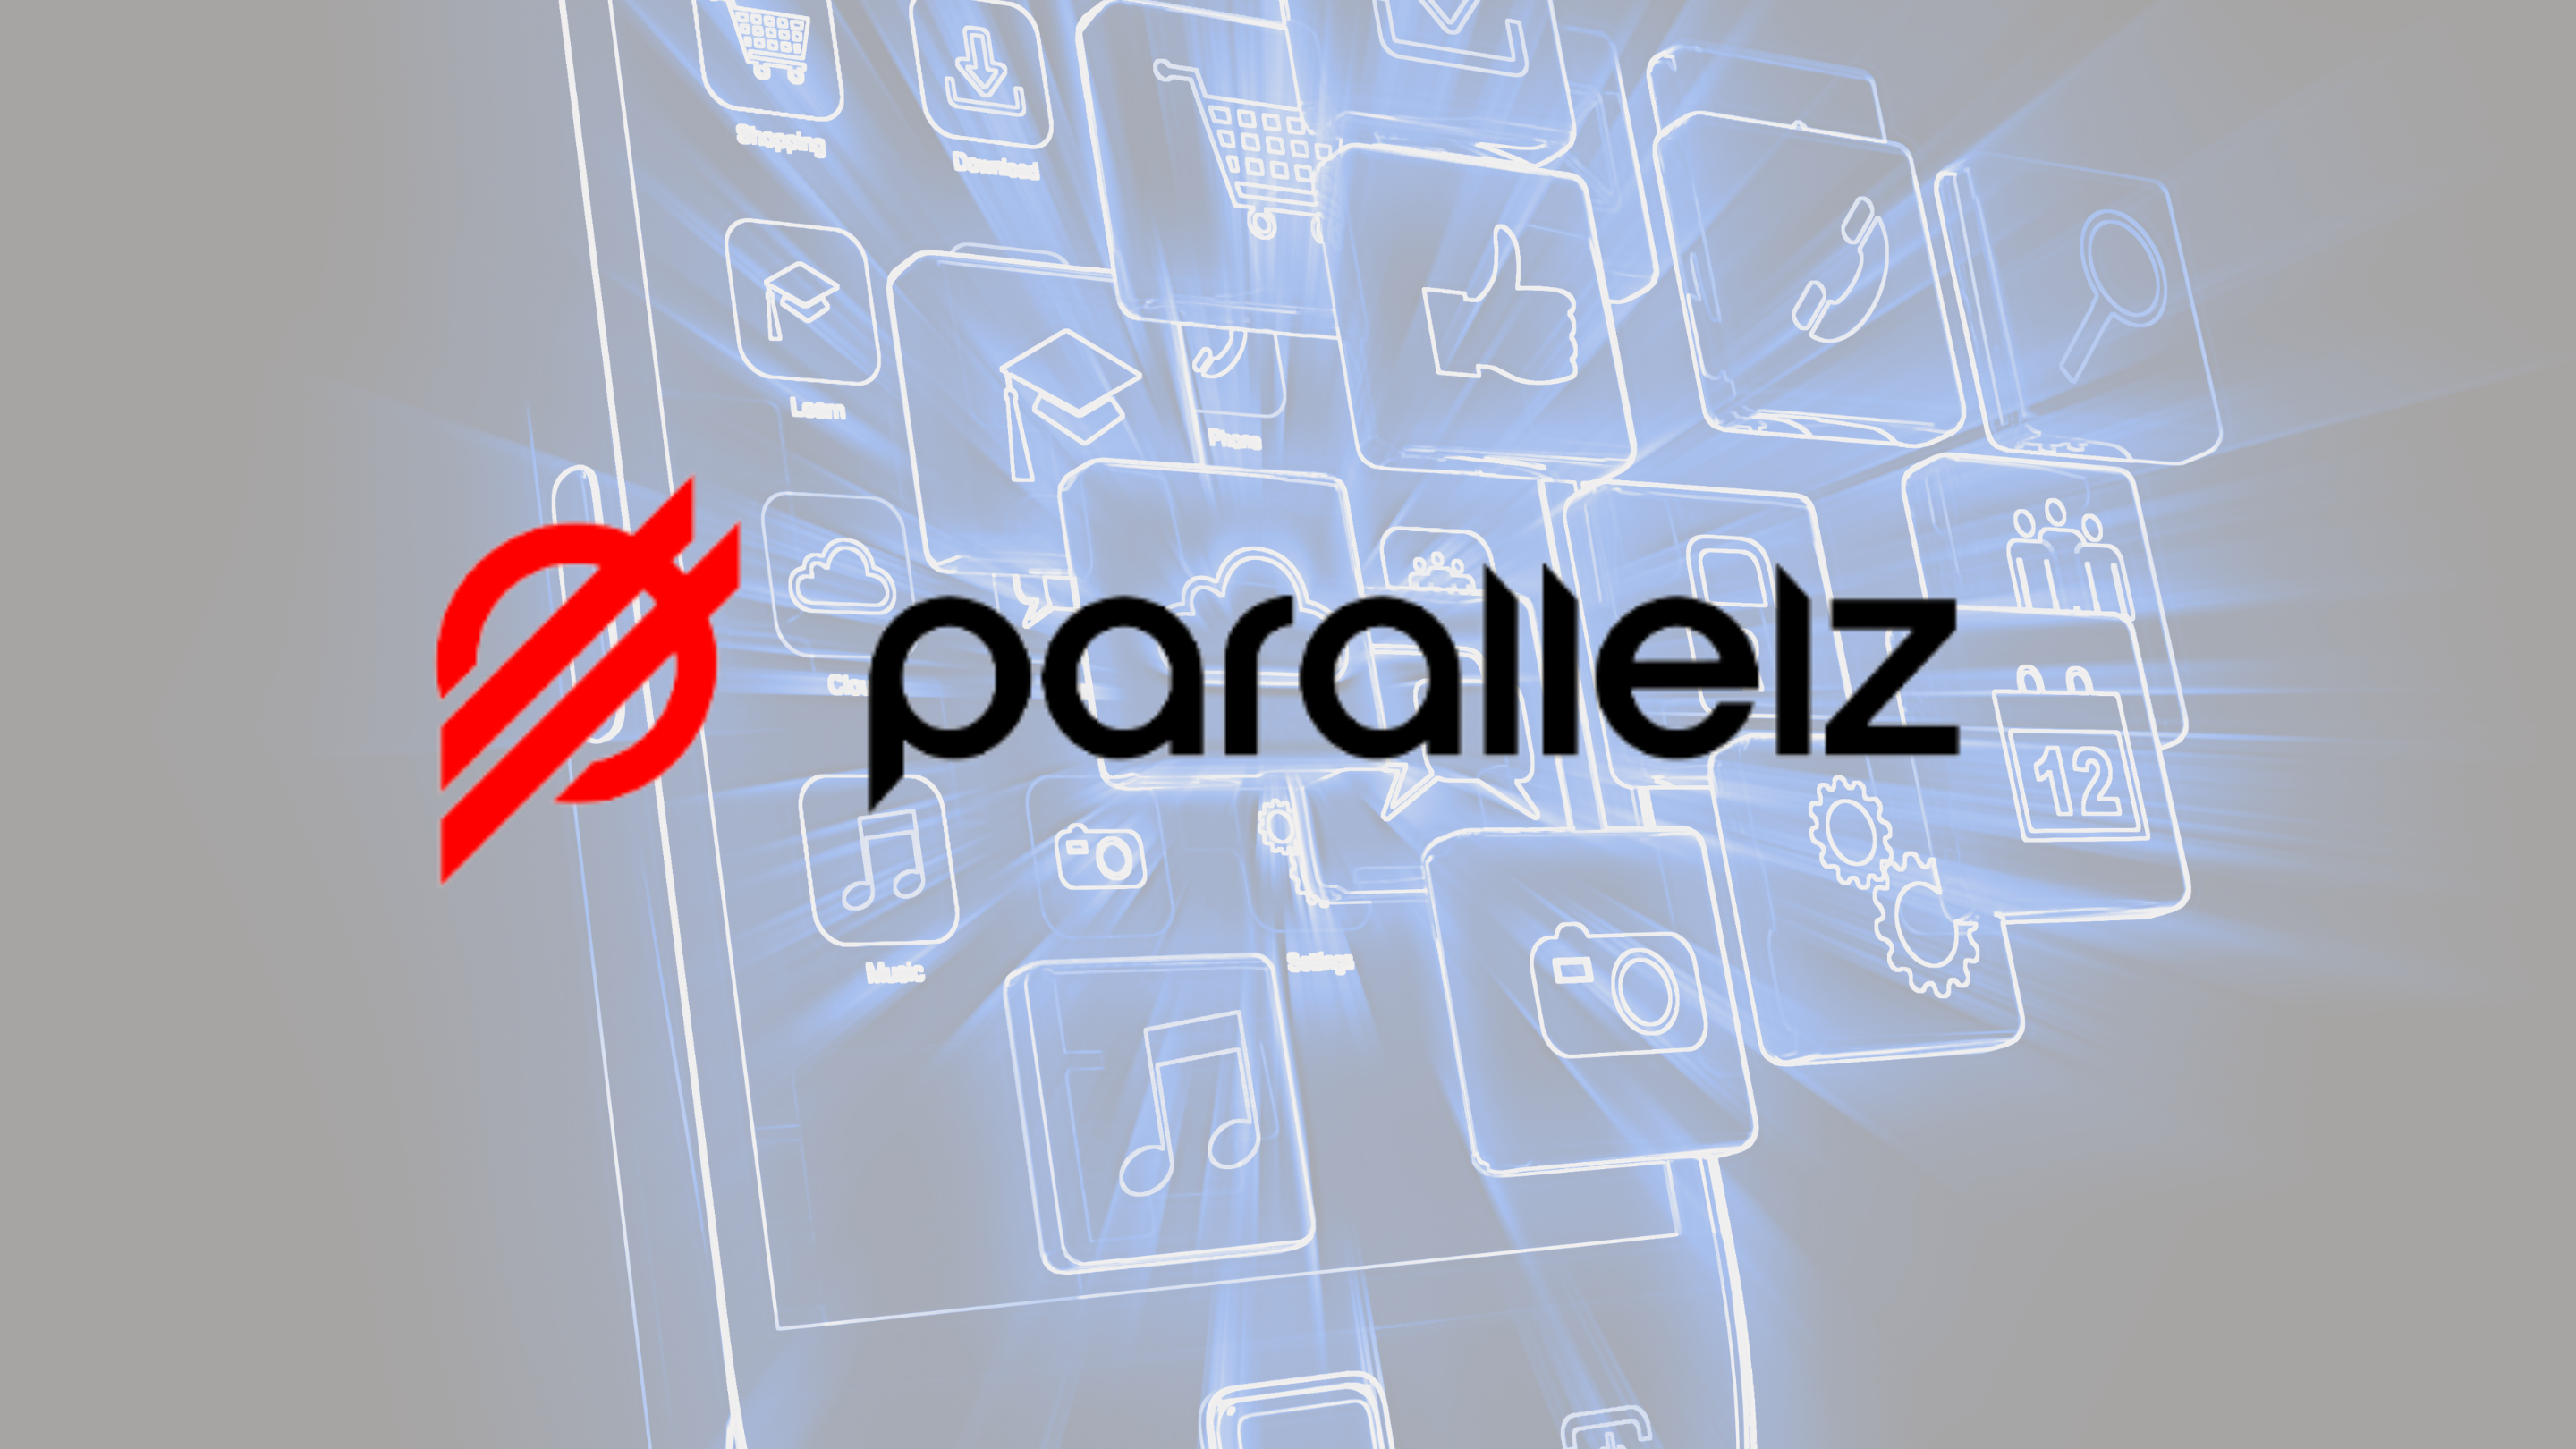 Parallelz raises $3M to enable developers, with no modifications or SDK, to transform their existing native-mobile apps into fully native-web apps.